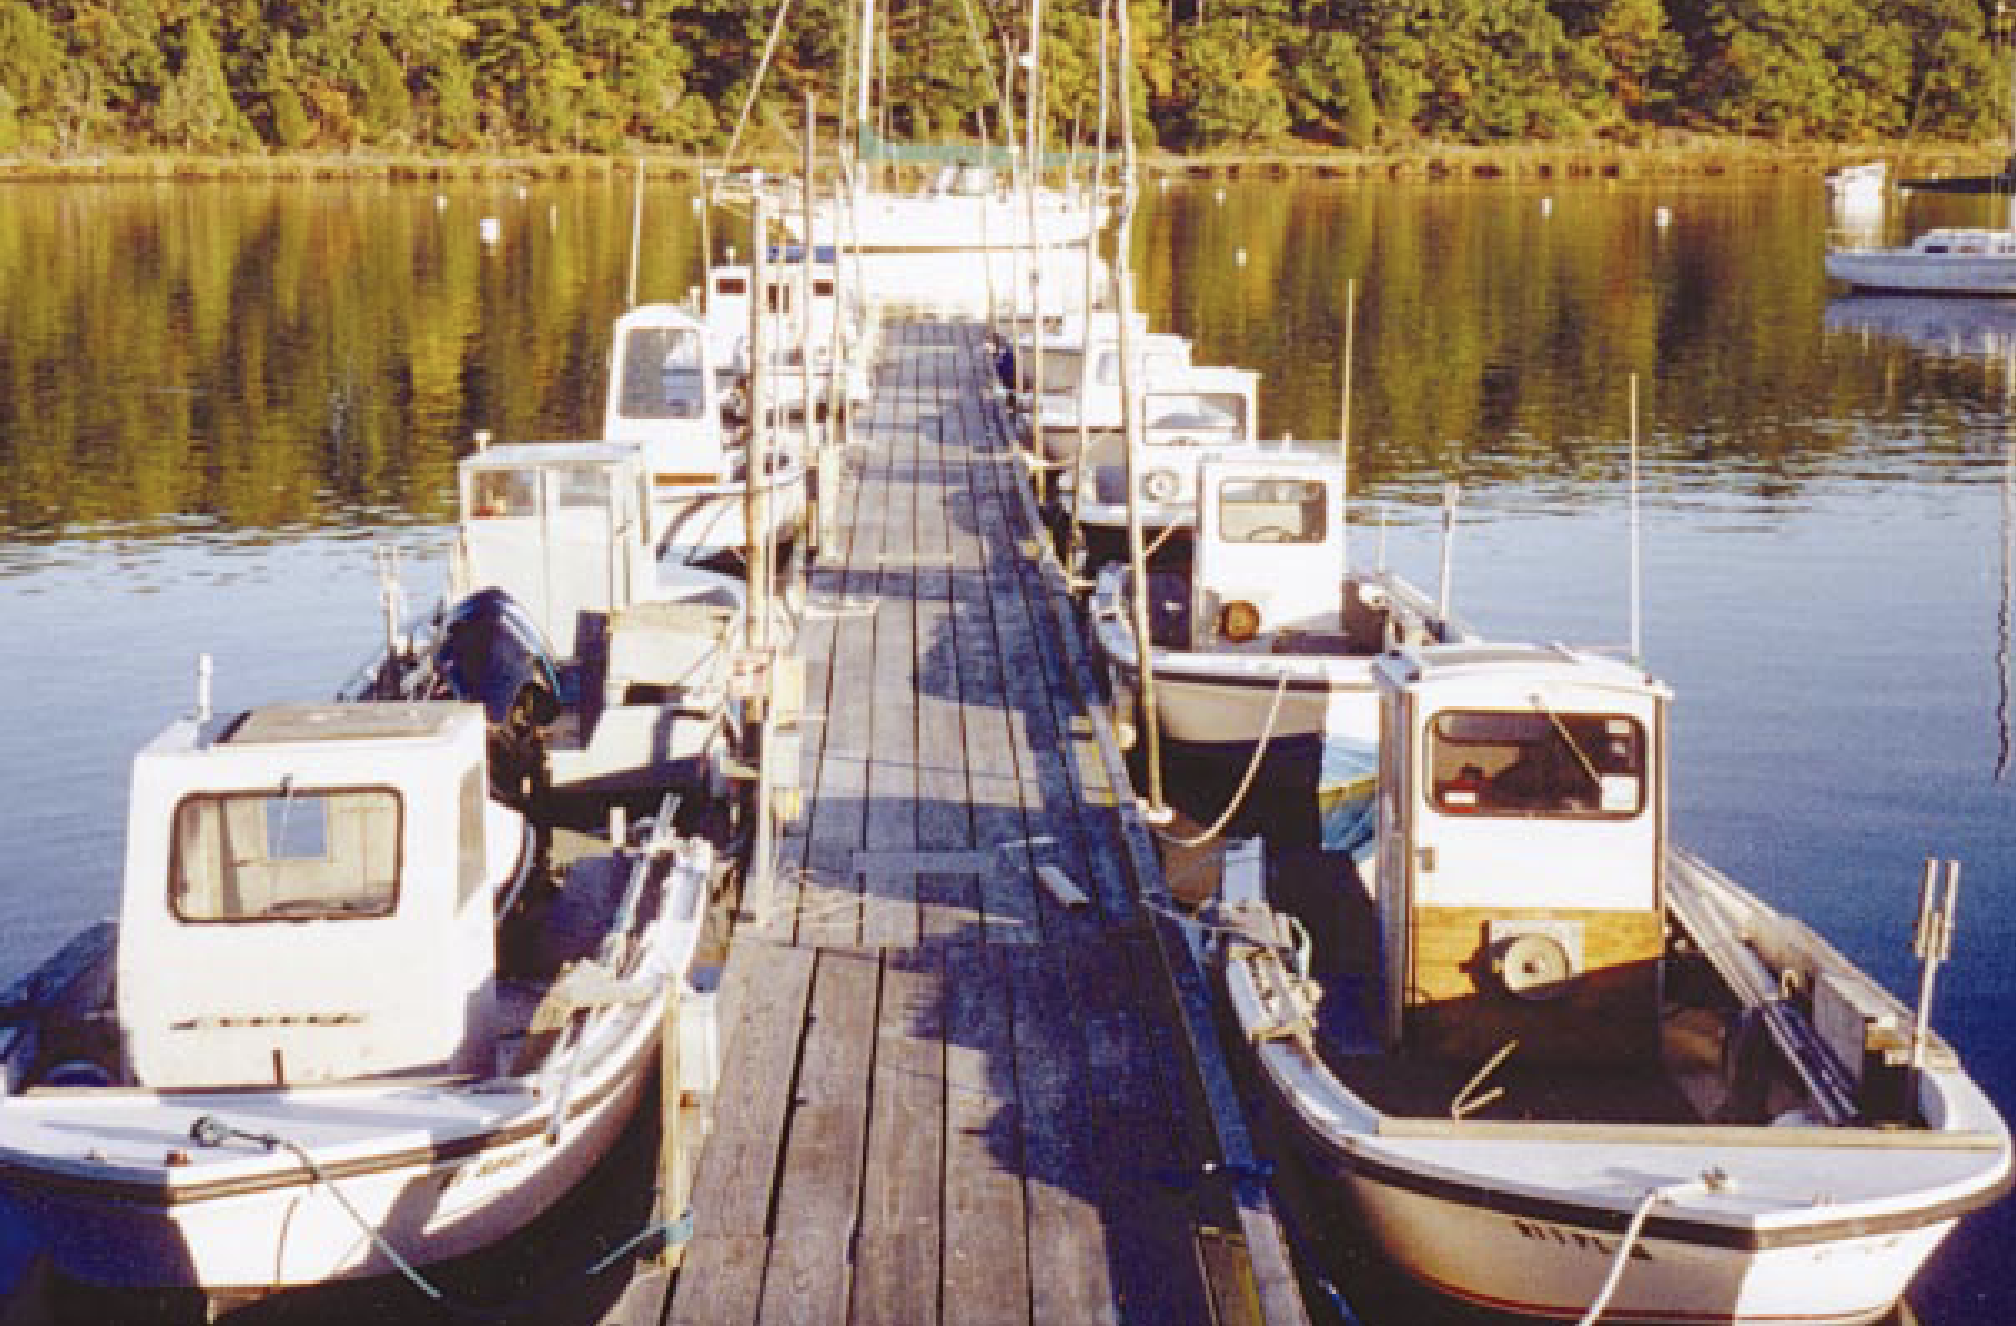 A group of boats docked at a dock.